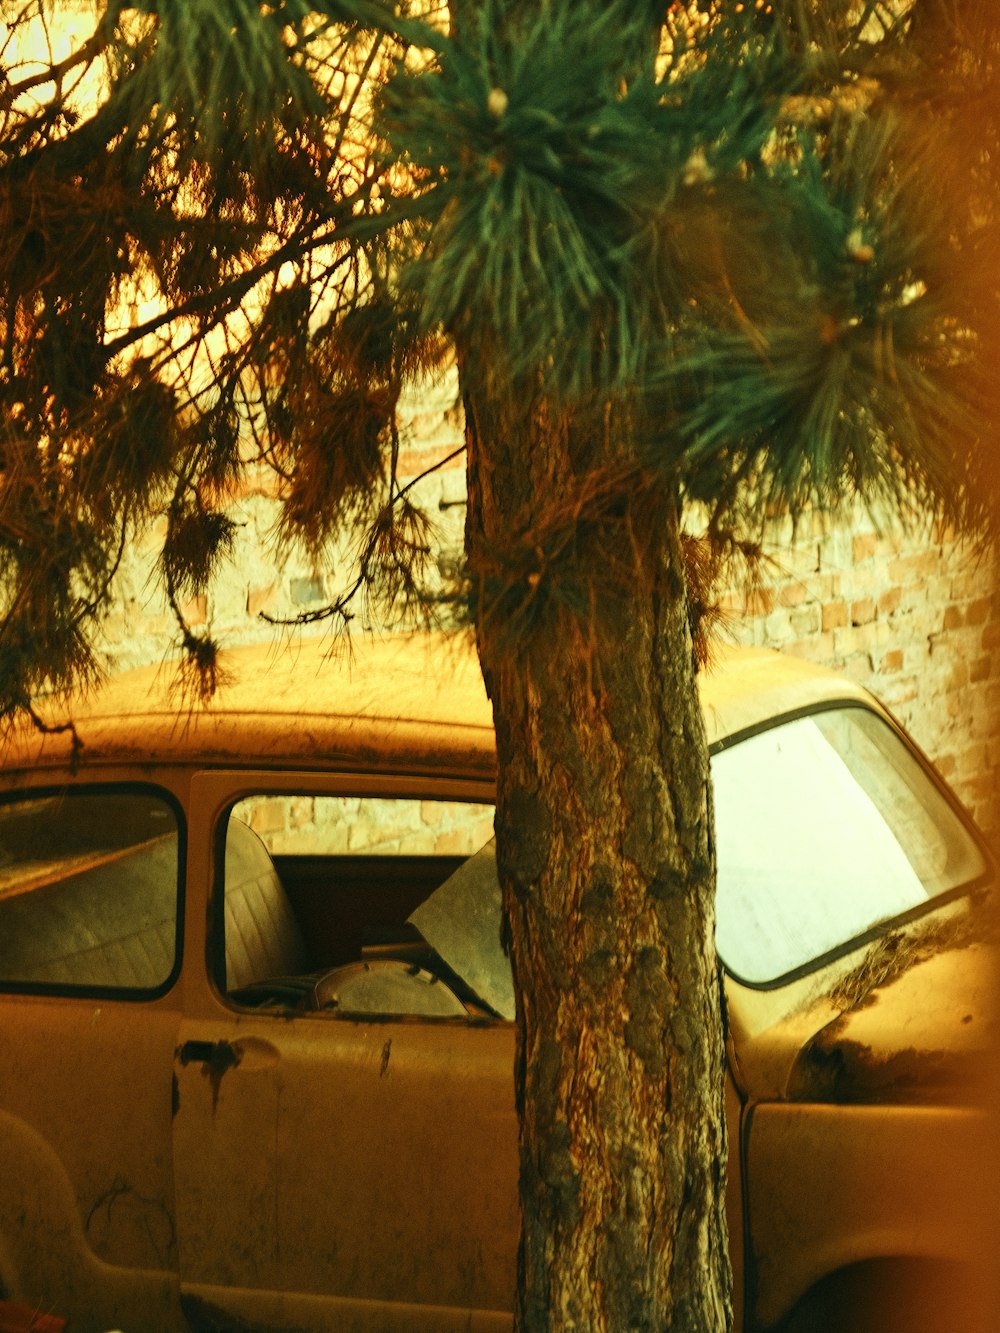 an old car is parked next to a tree